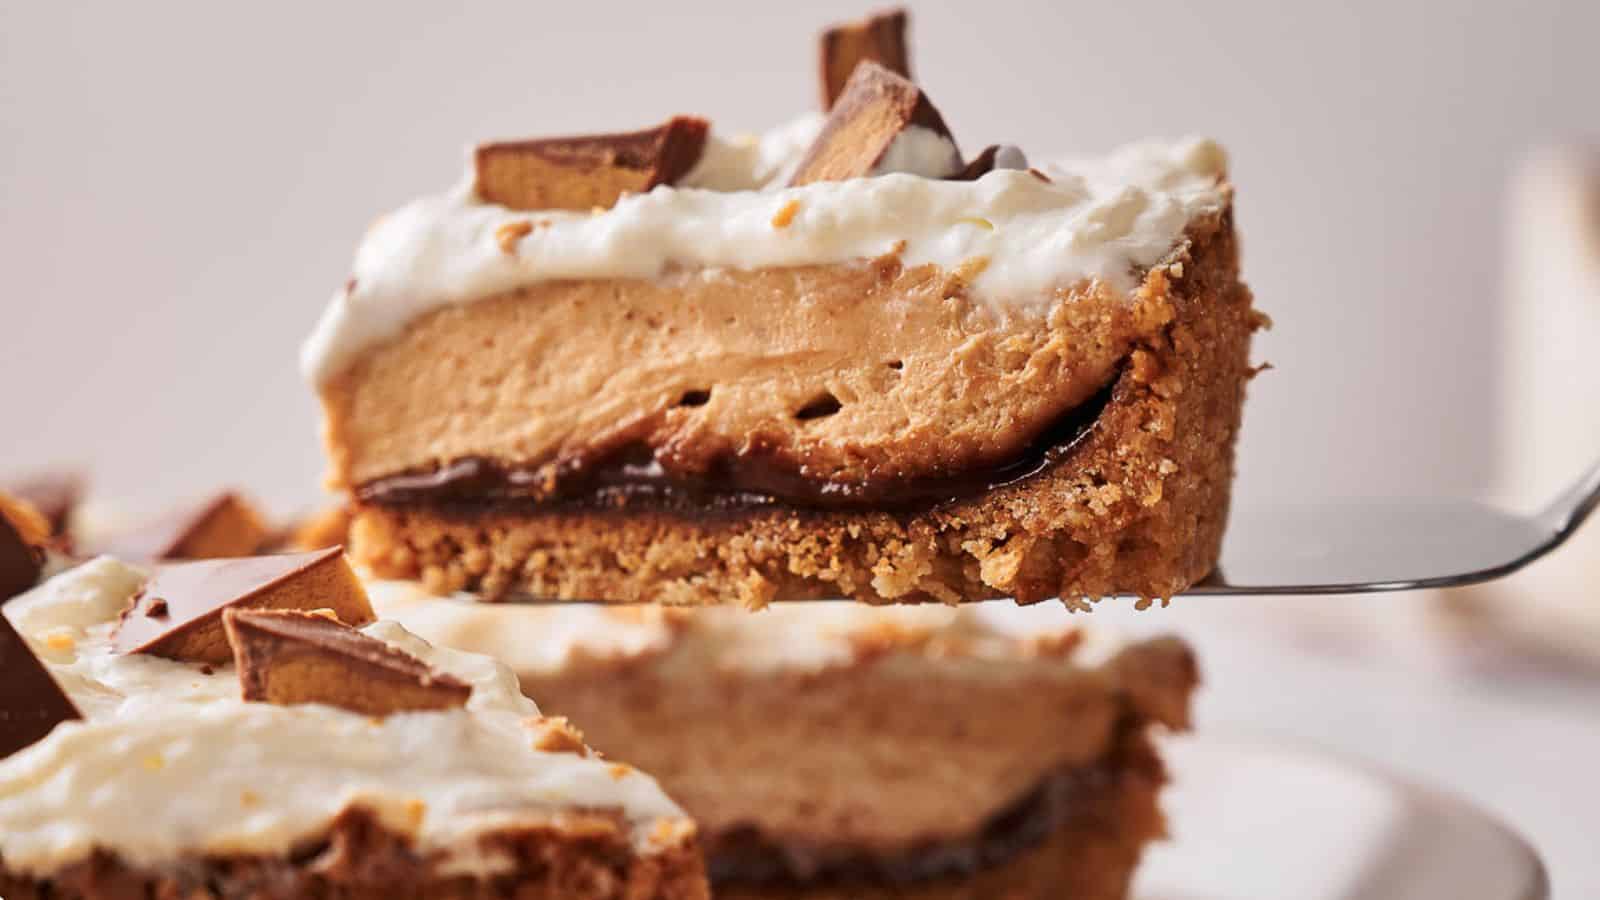 <p>Chocolate and peanut butter, a match made in heaven. Perfect for those in the family who love the iconic combo. Expect empty plates in minutes.<br><strong>Get the Recipe: </strong><a href="https://www.splashoftaste.com/reeses-pie/?utm_source=msn&utm_medium=page&utm_campaign=msn">Reese’s Peanut Butter Pie</a></p>